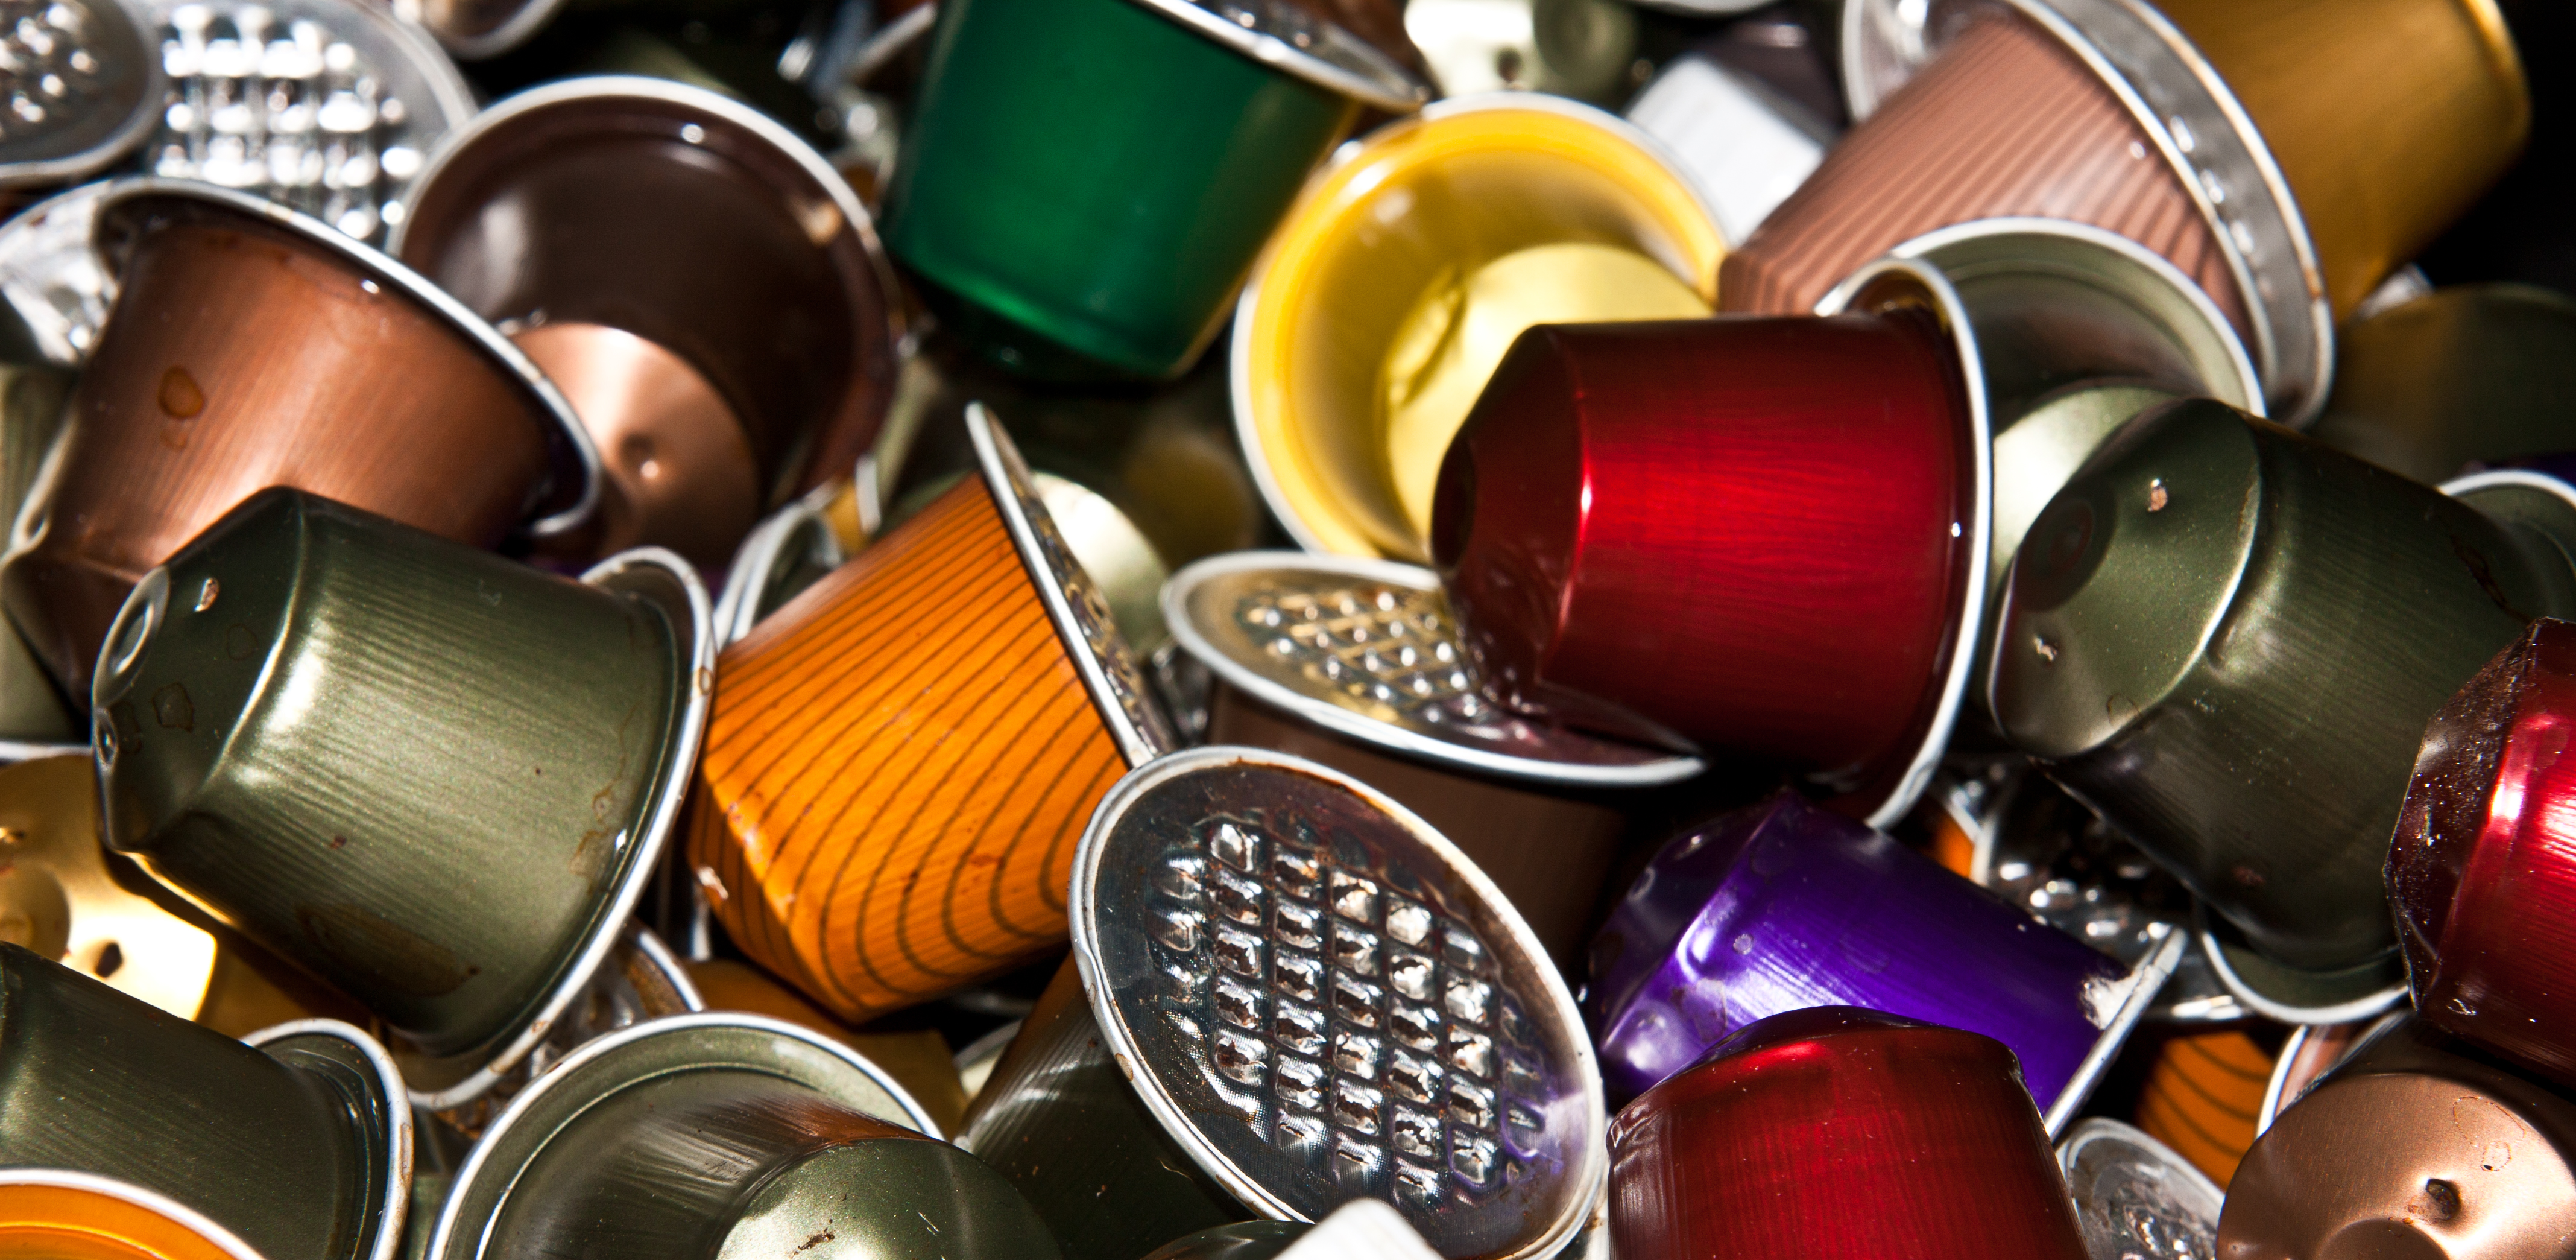 Recycling your coffee pods?